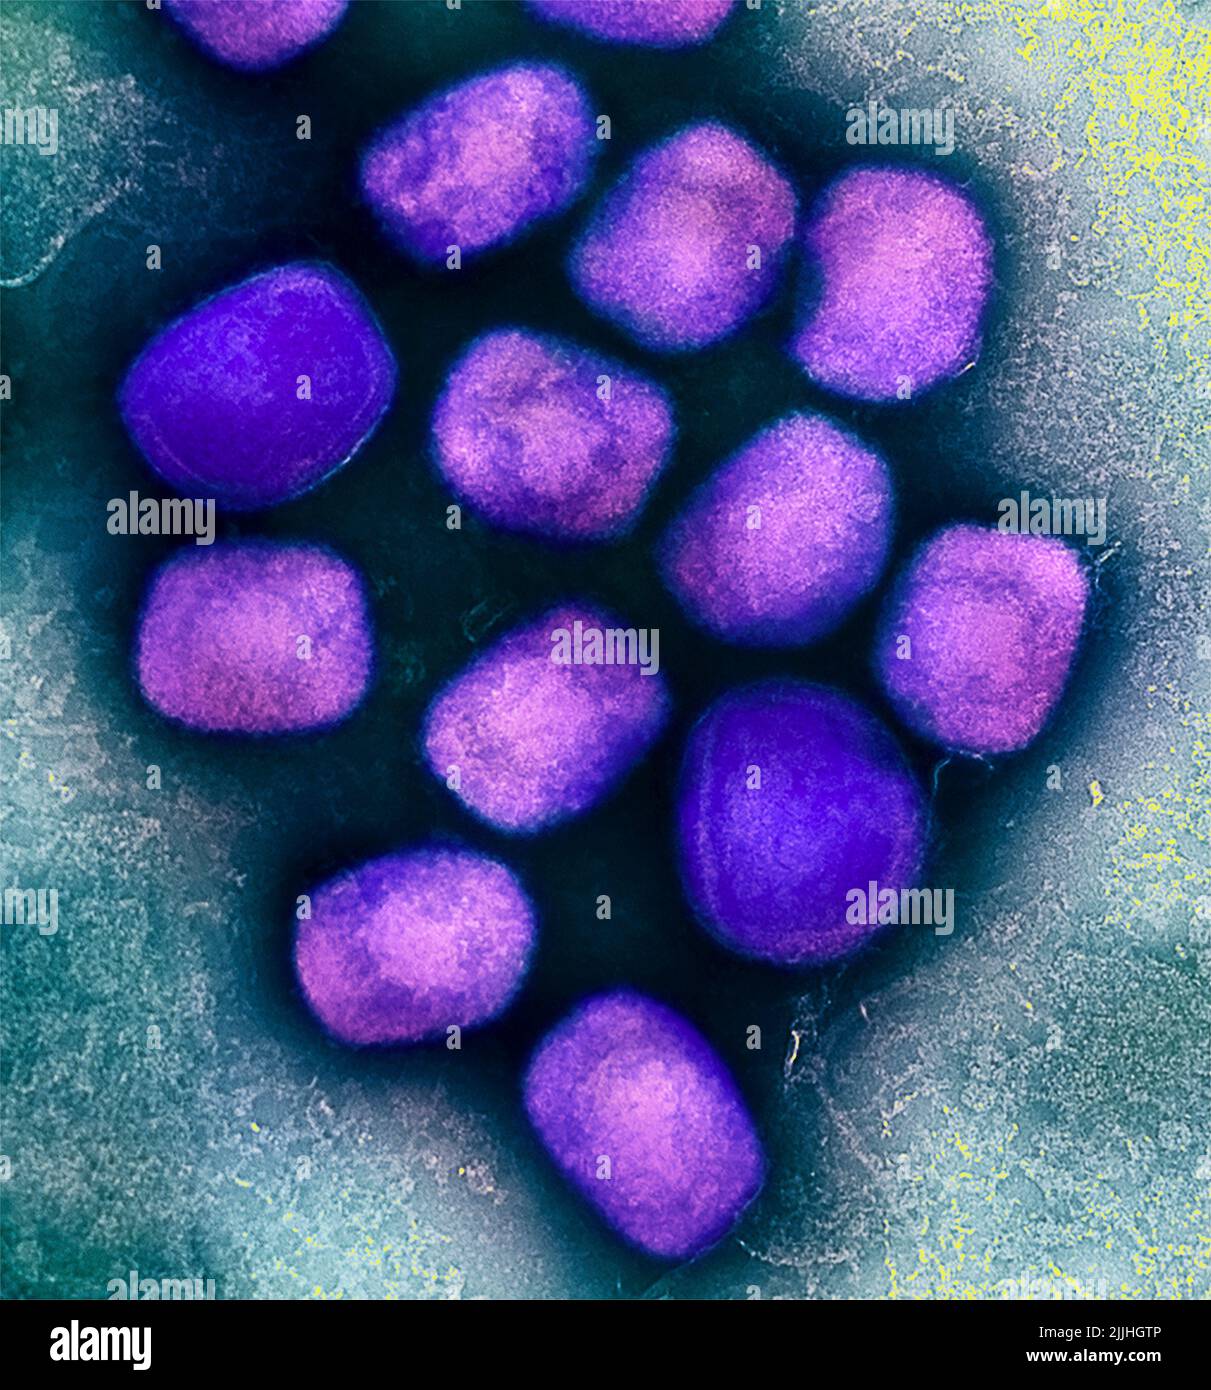 Fort Detrick, United States. 26th July, 2022. A colorized transmission electron micrograph of monkeypox virus particles (purple) cultivated and purified from cell culture captured at the NIAID Integrated Research Facility released July 26, 2022, in Fort Detrick, Maryland. Credit: NIAID/NIAID/Alamy Live News Stock Photo